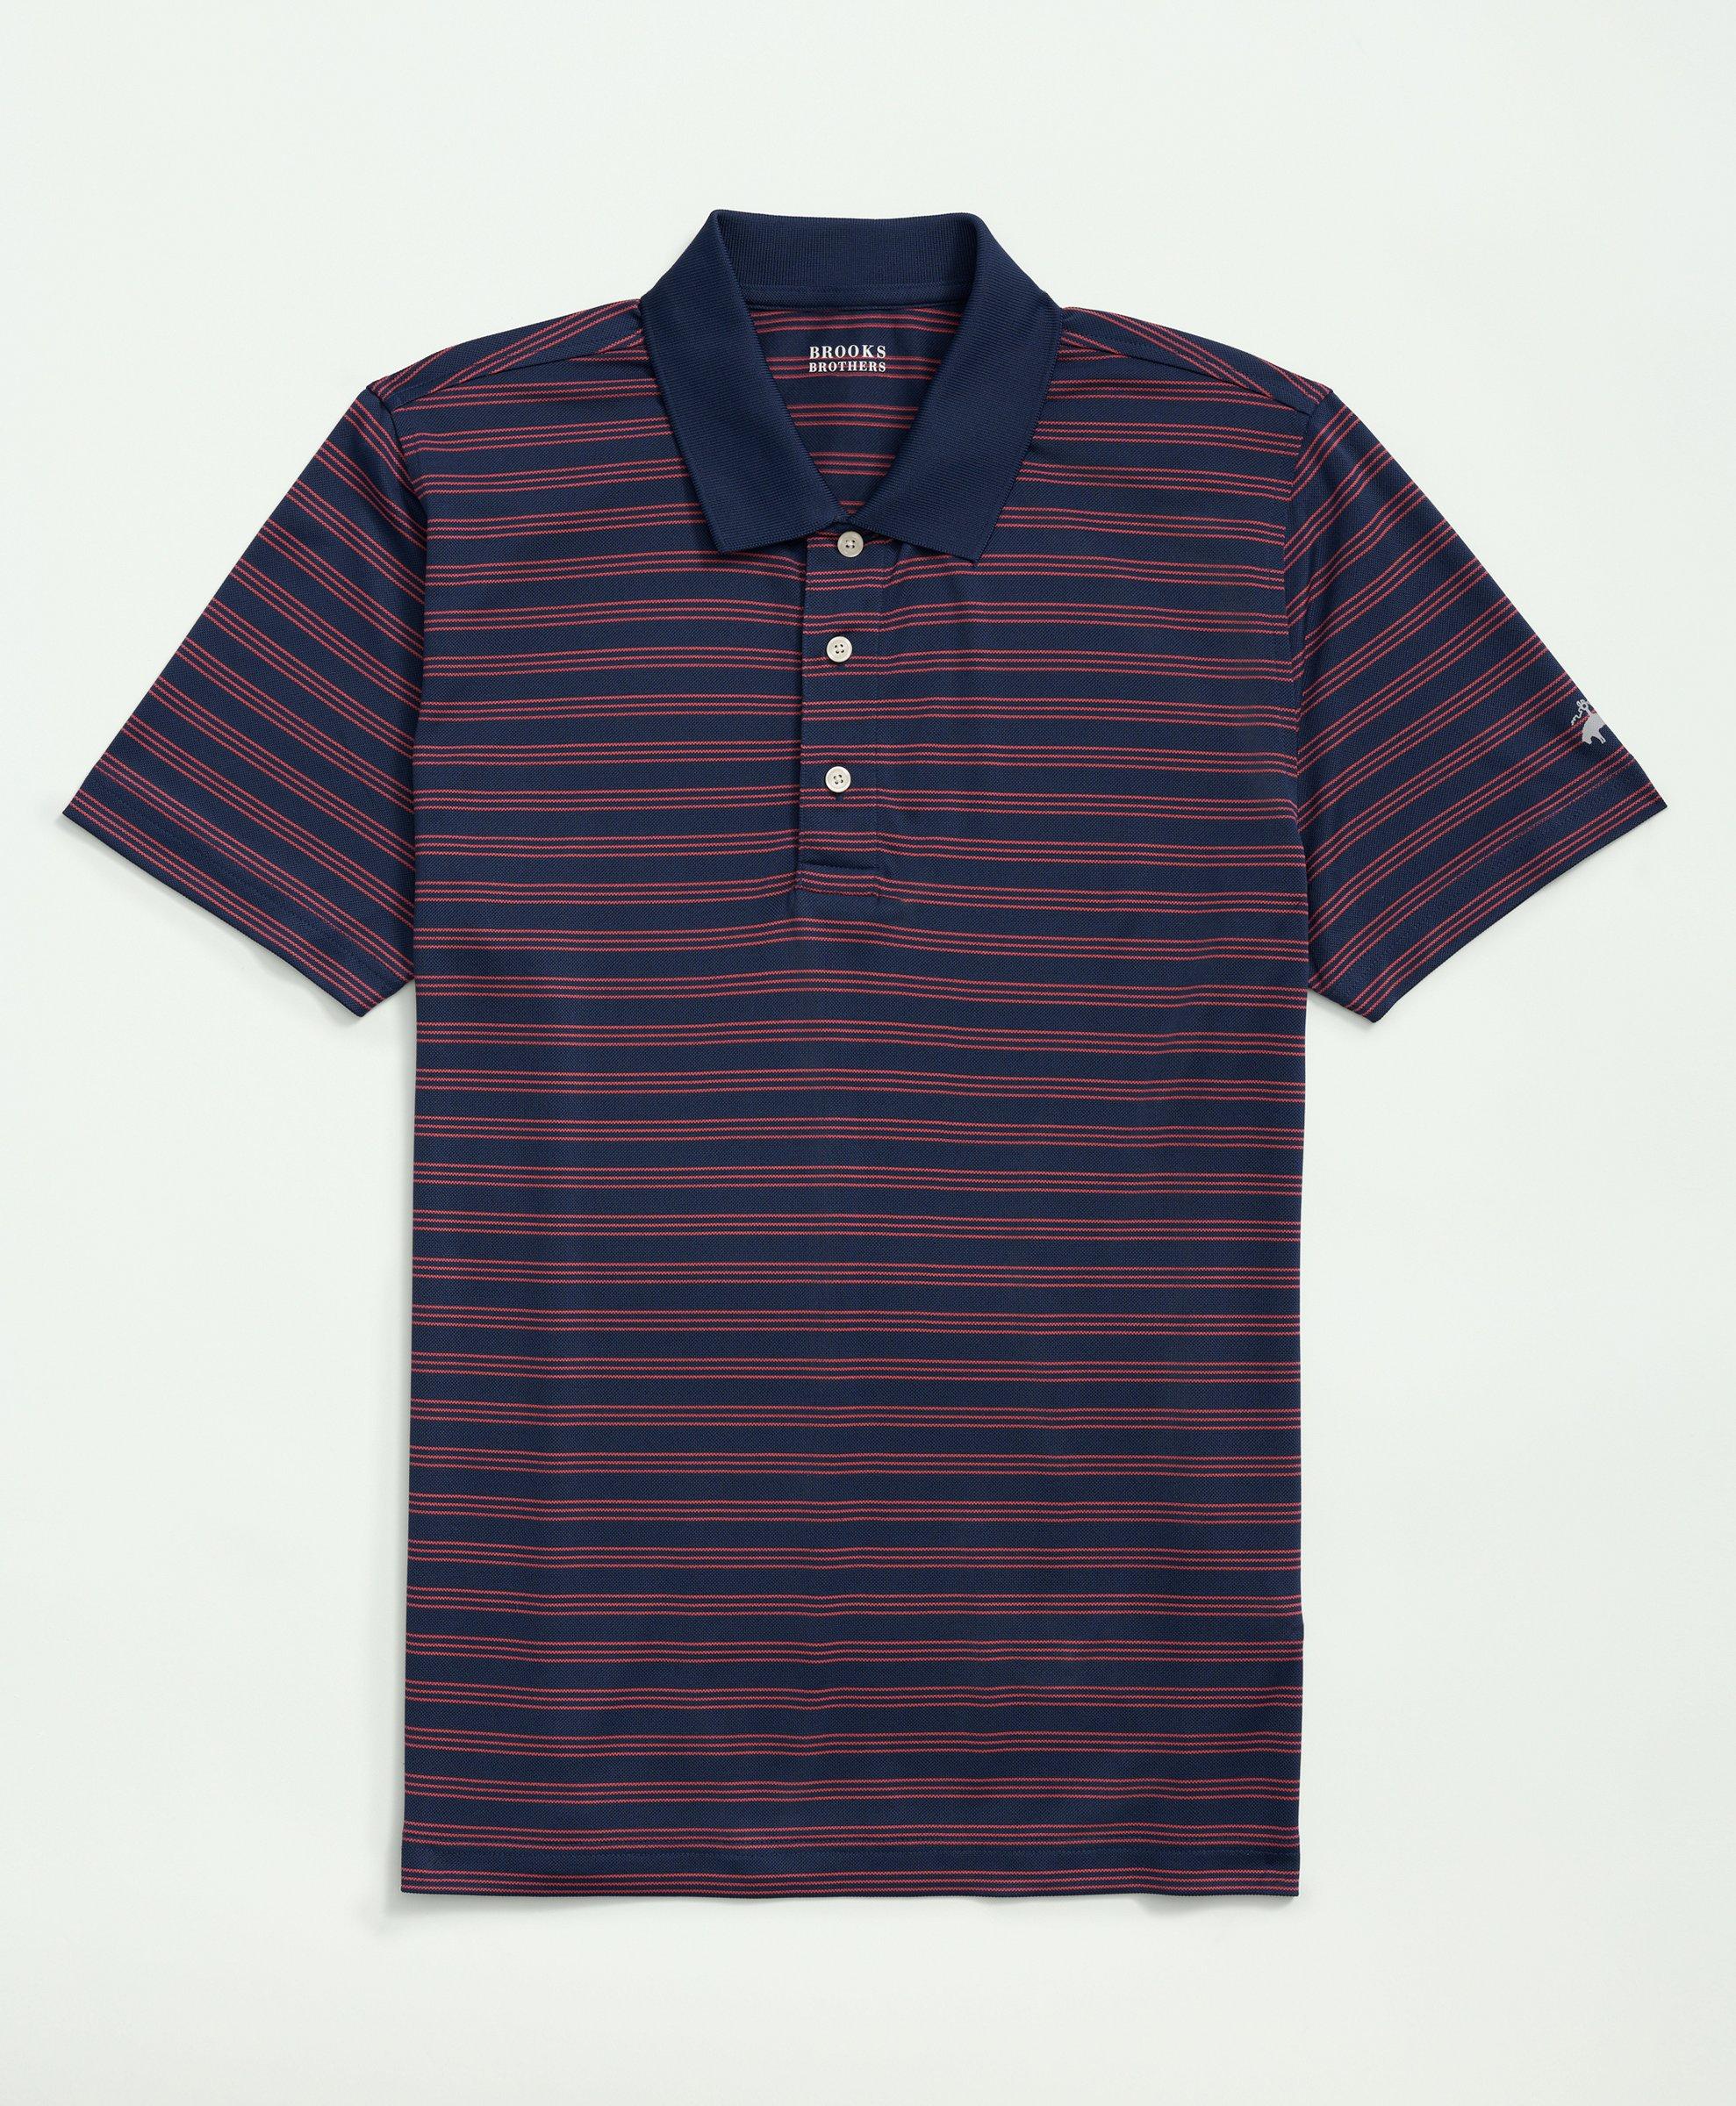 Performance Polo | Brooks Brothers